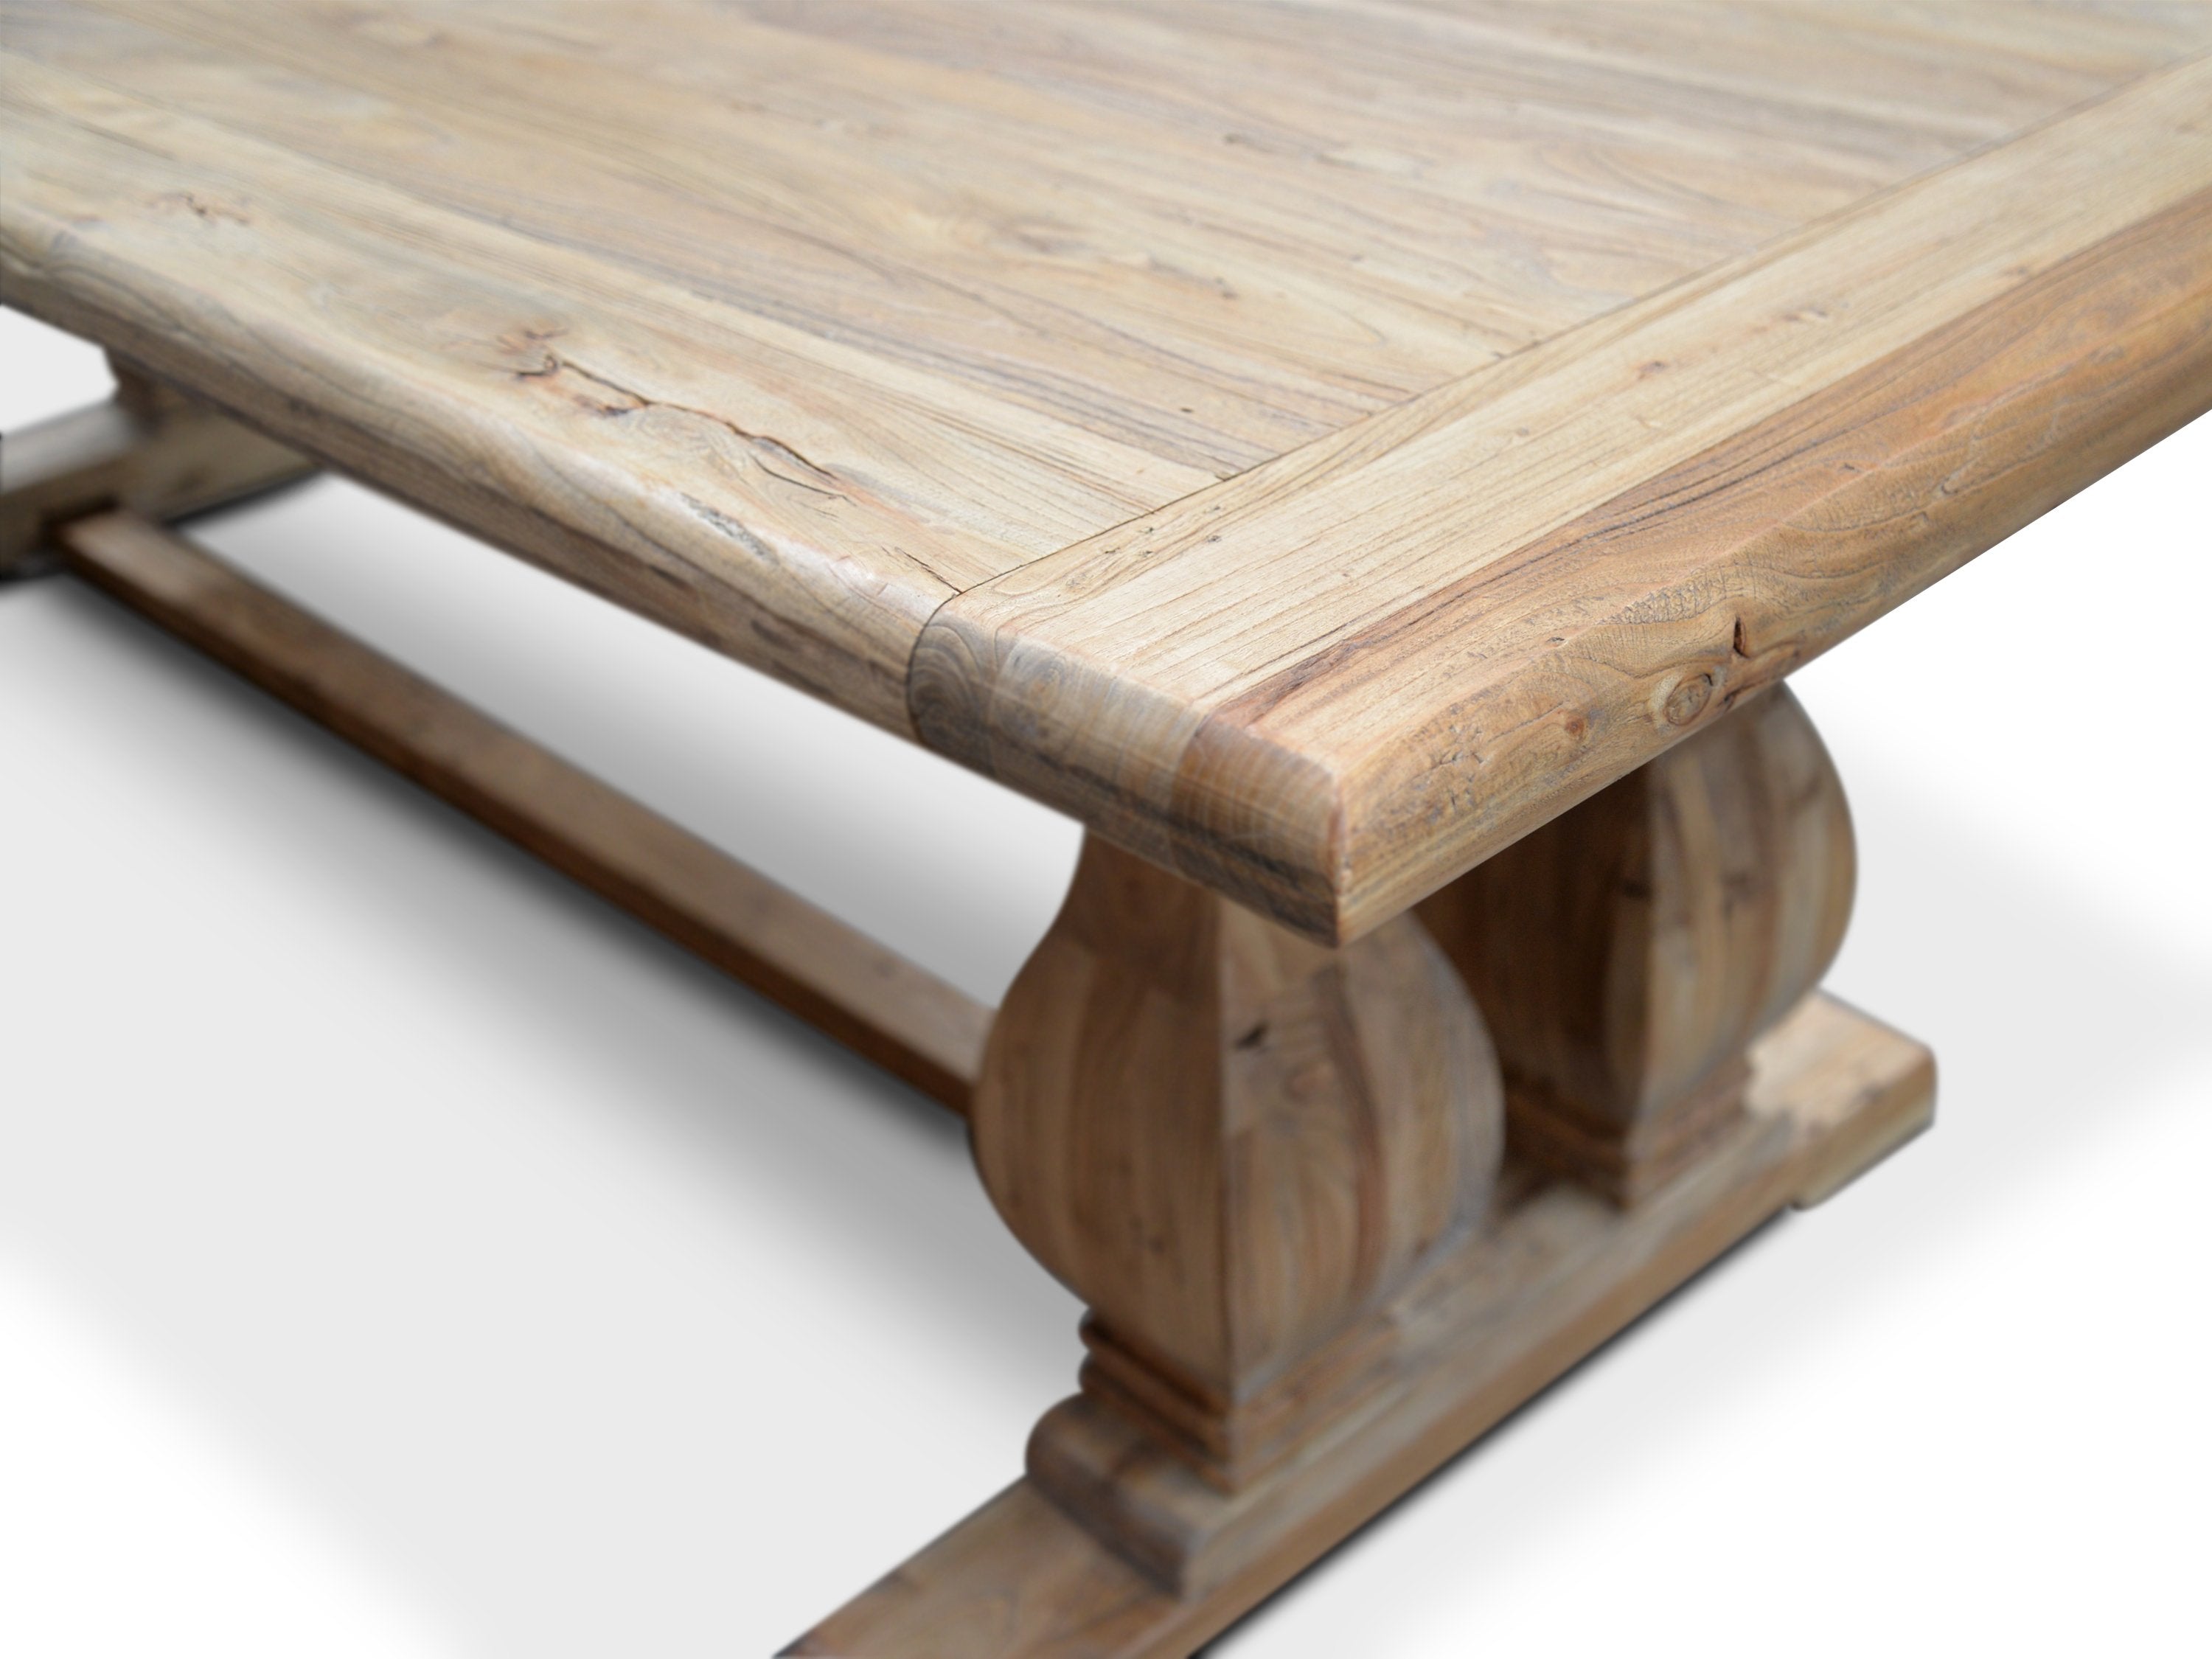 Lima Oak Wood 3m Dining Table - Rustic Natural - Dining Tables